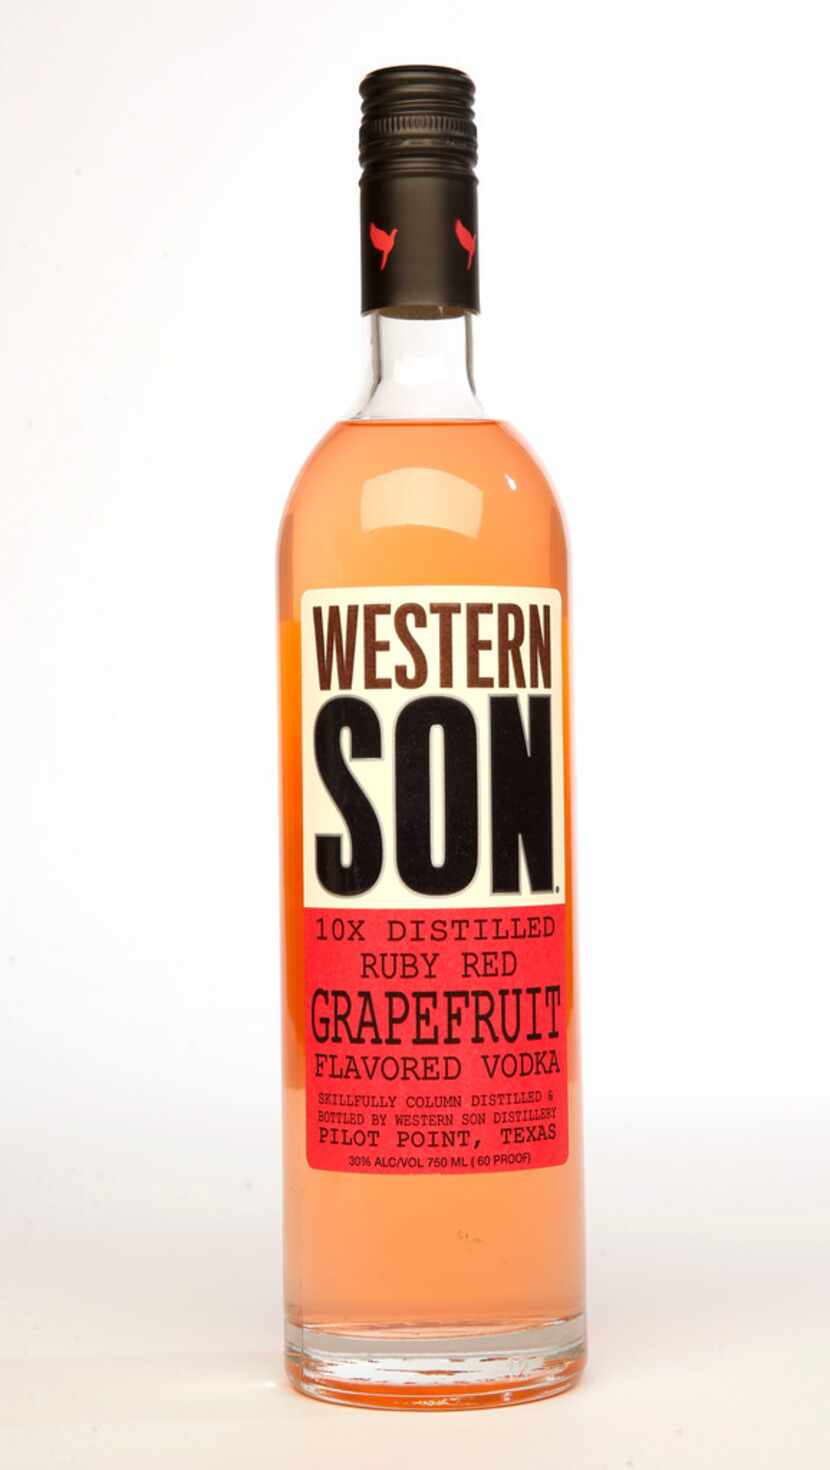 Western Son vodka is made in Pilot Point